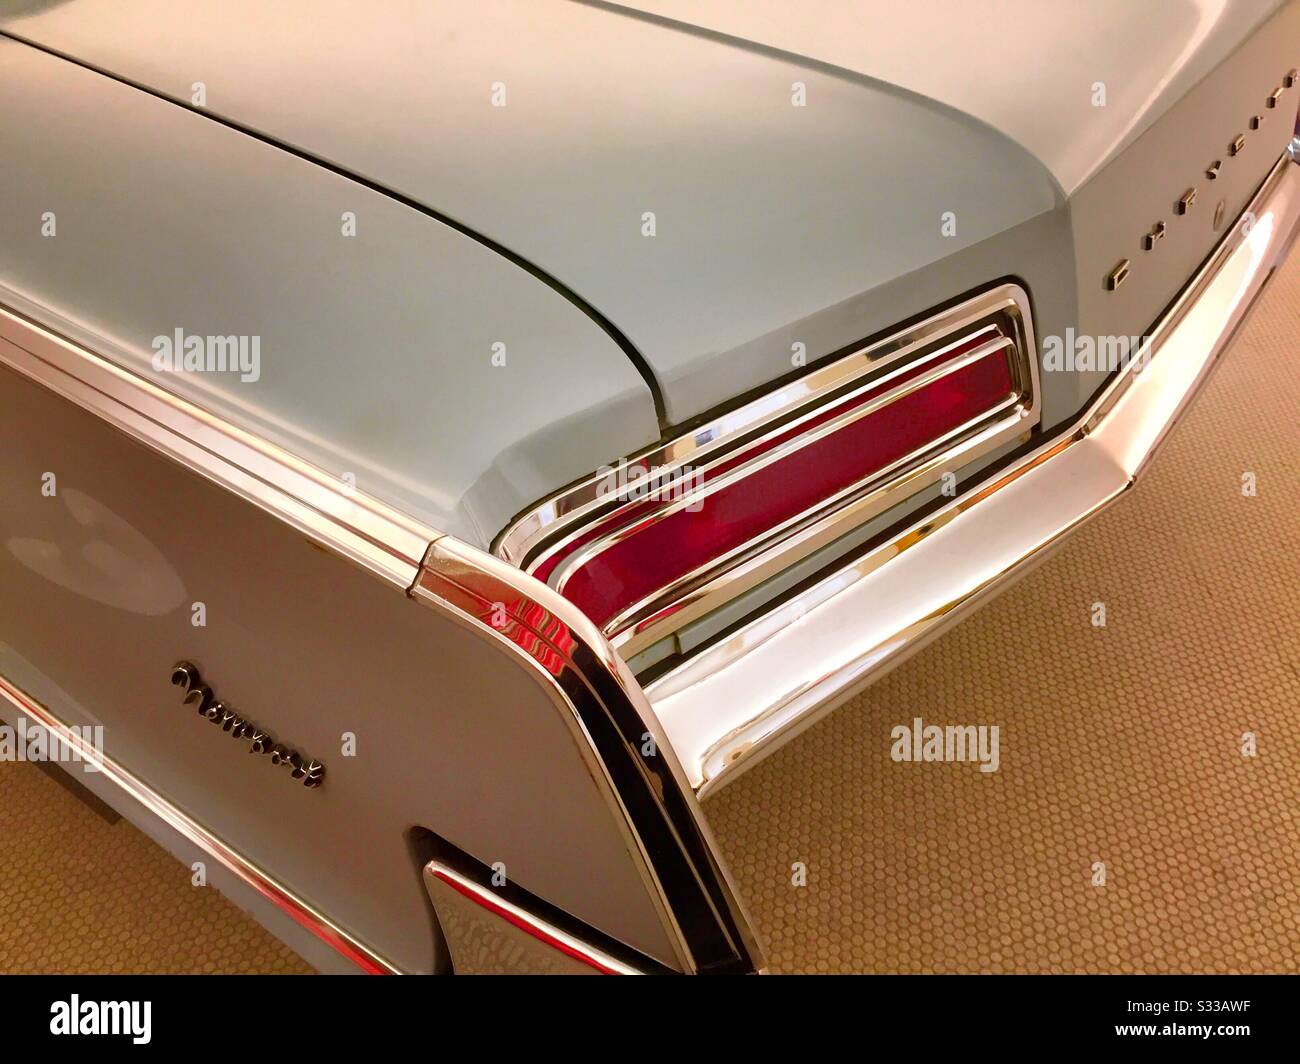 Vintage 1962 Chrysler Newport automobile chrome rear bumper, fender and trunk close up, USA Stock Photo